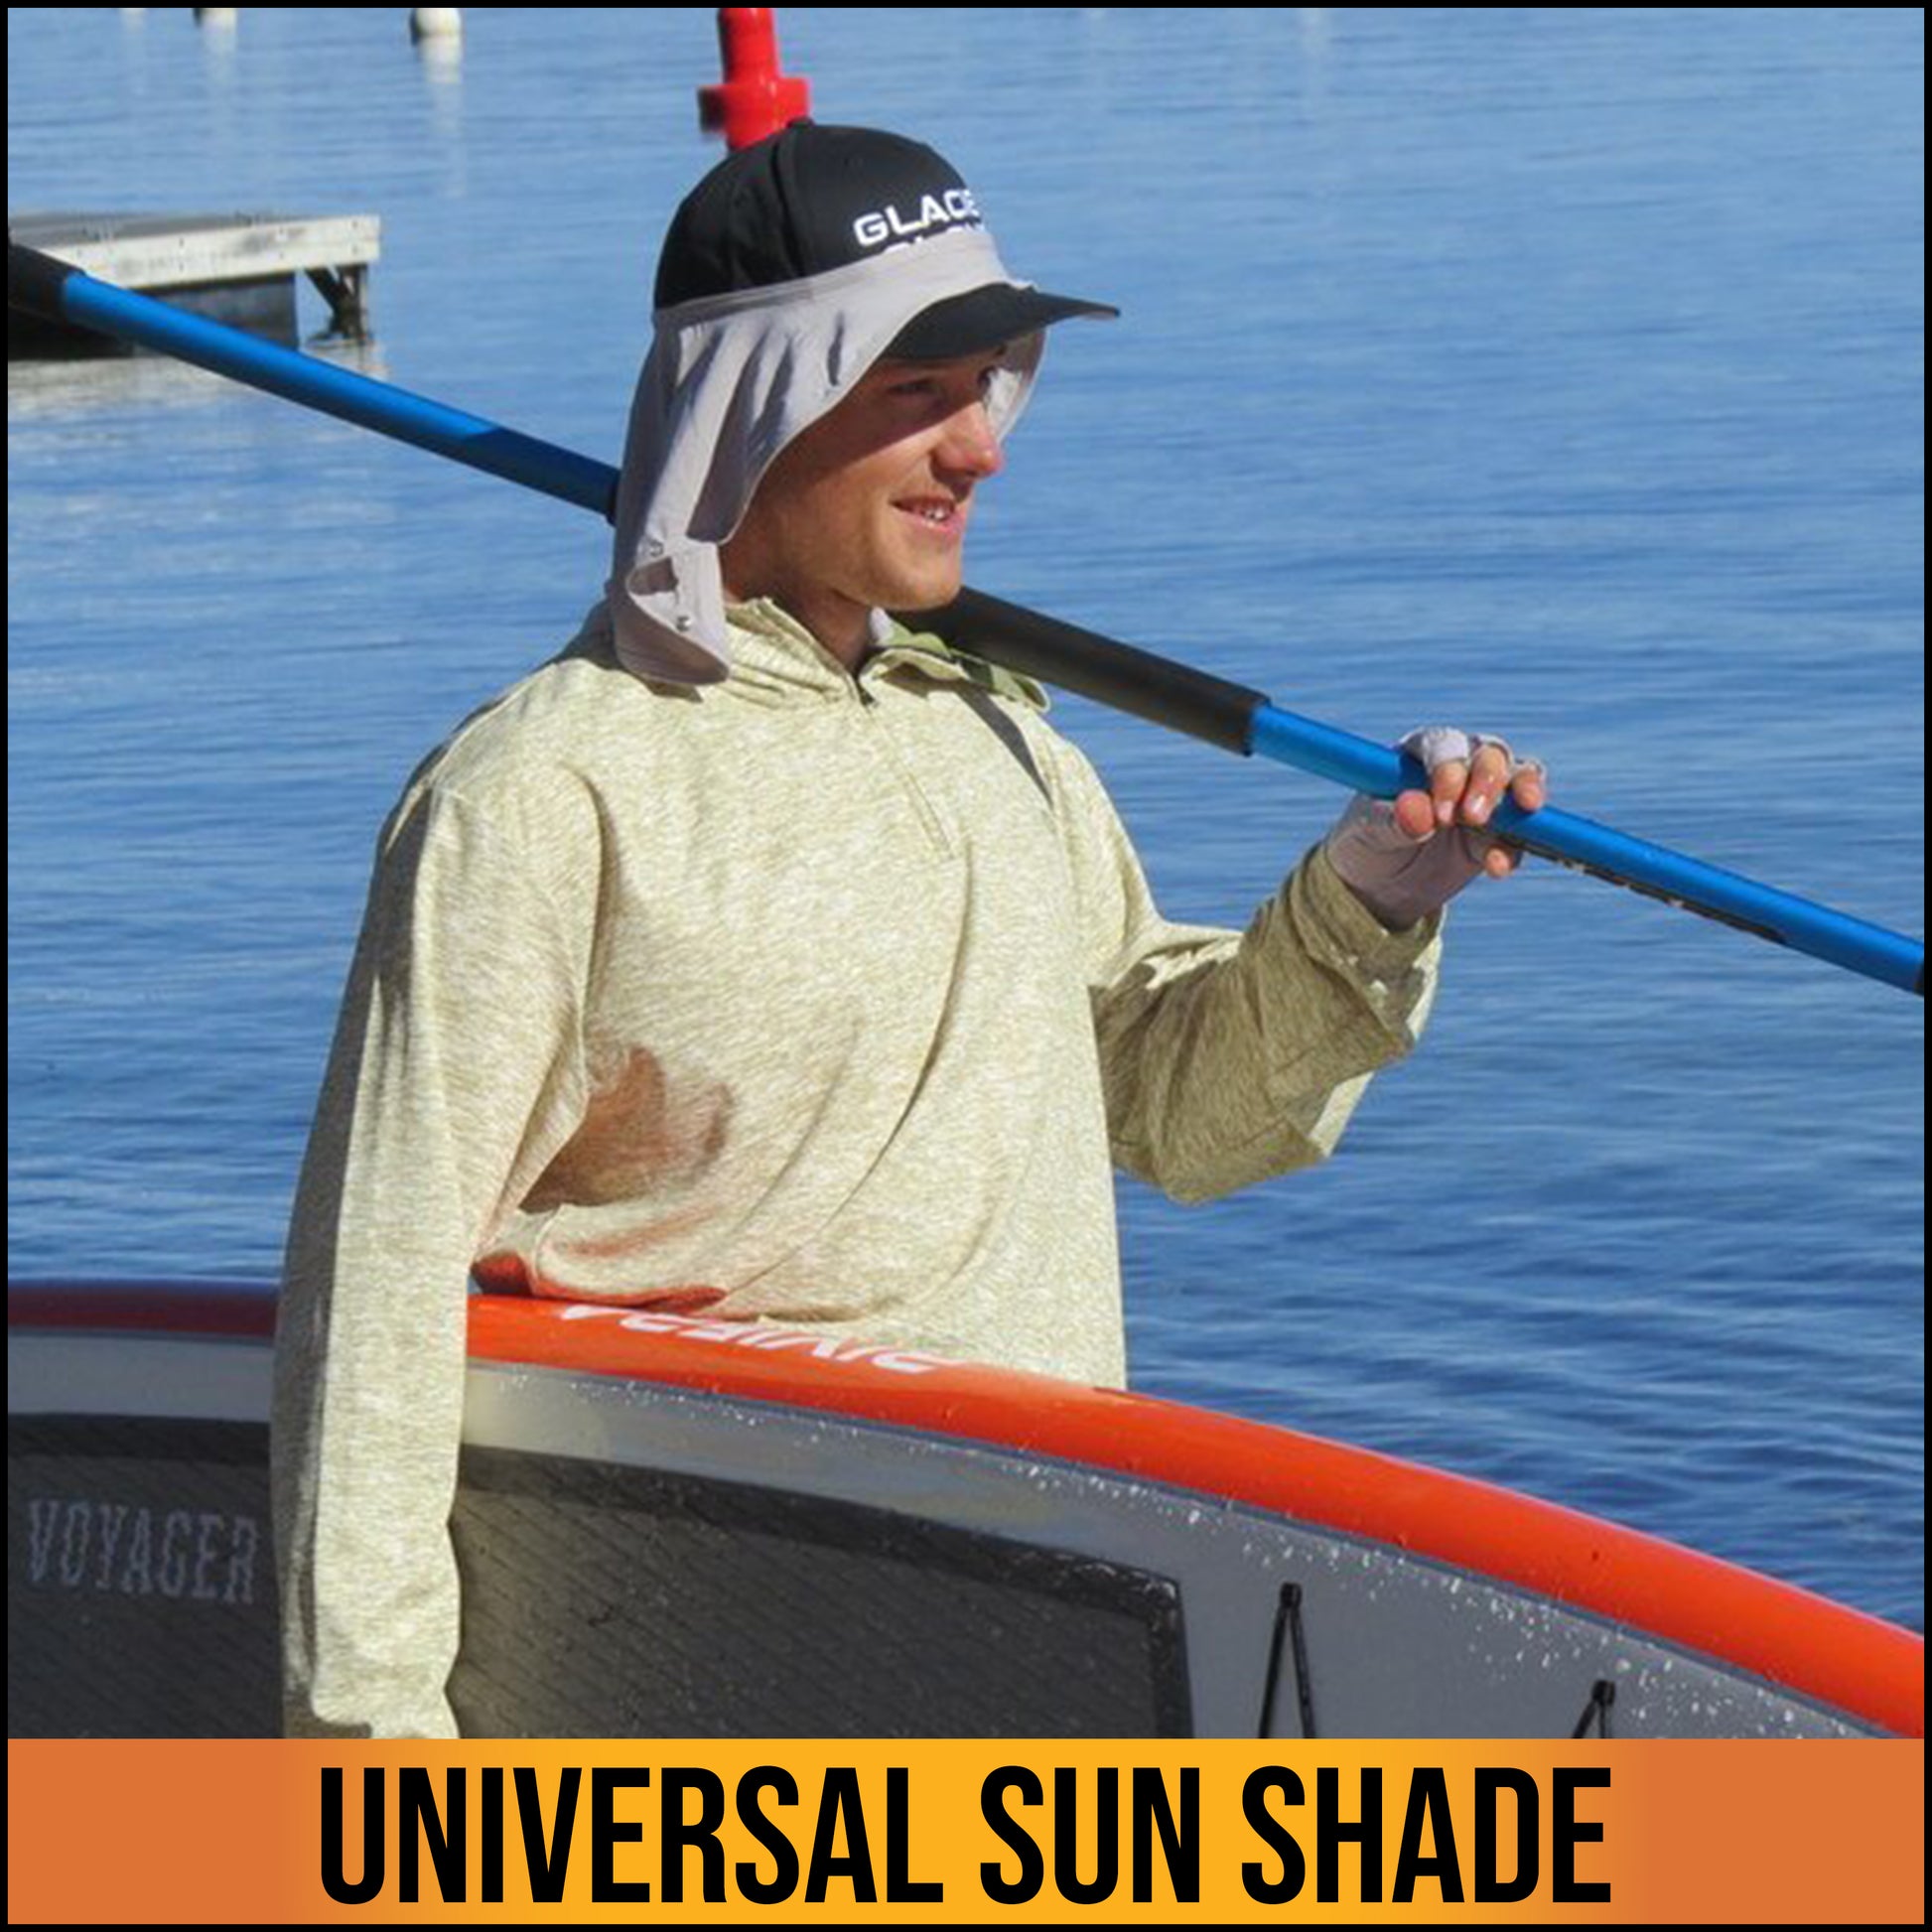 The Universal Sun Shade is a great choice for warm, sunny days. This UPF 50+ sun shade is designed to help protect against the sun’s harmful rays and keep you outdoors longer.